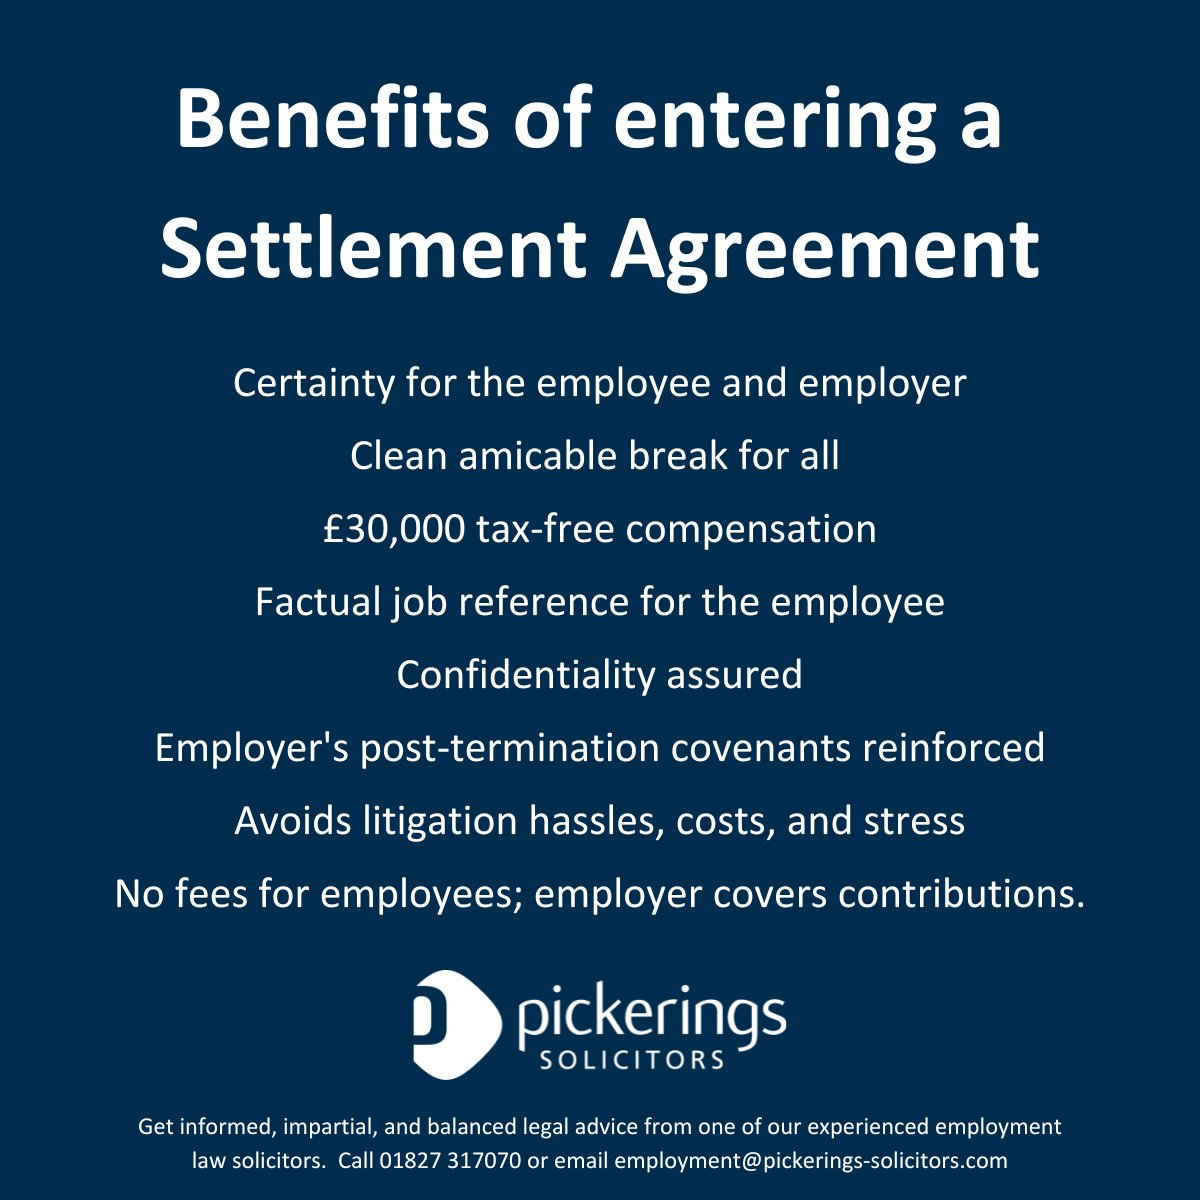 Need help with a Settlement Agreement?      

We offer a same day certification.    

🌐 rb.gy/8nljs3 
📧 mail@pickerings-solicitors.com
📞01827 317070  

#settlementagreements #LegalGuidance #HR #hrchallenges #legalsupport